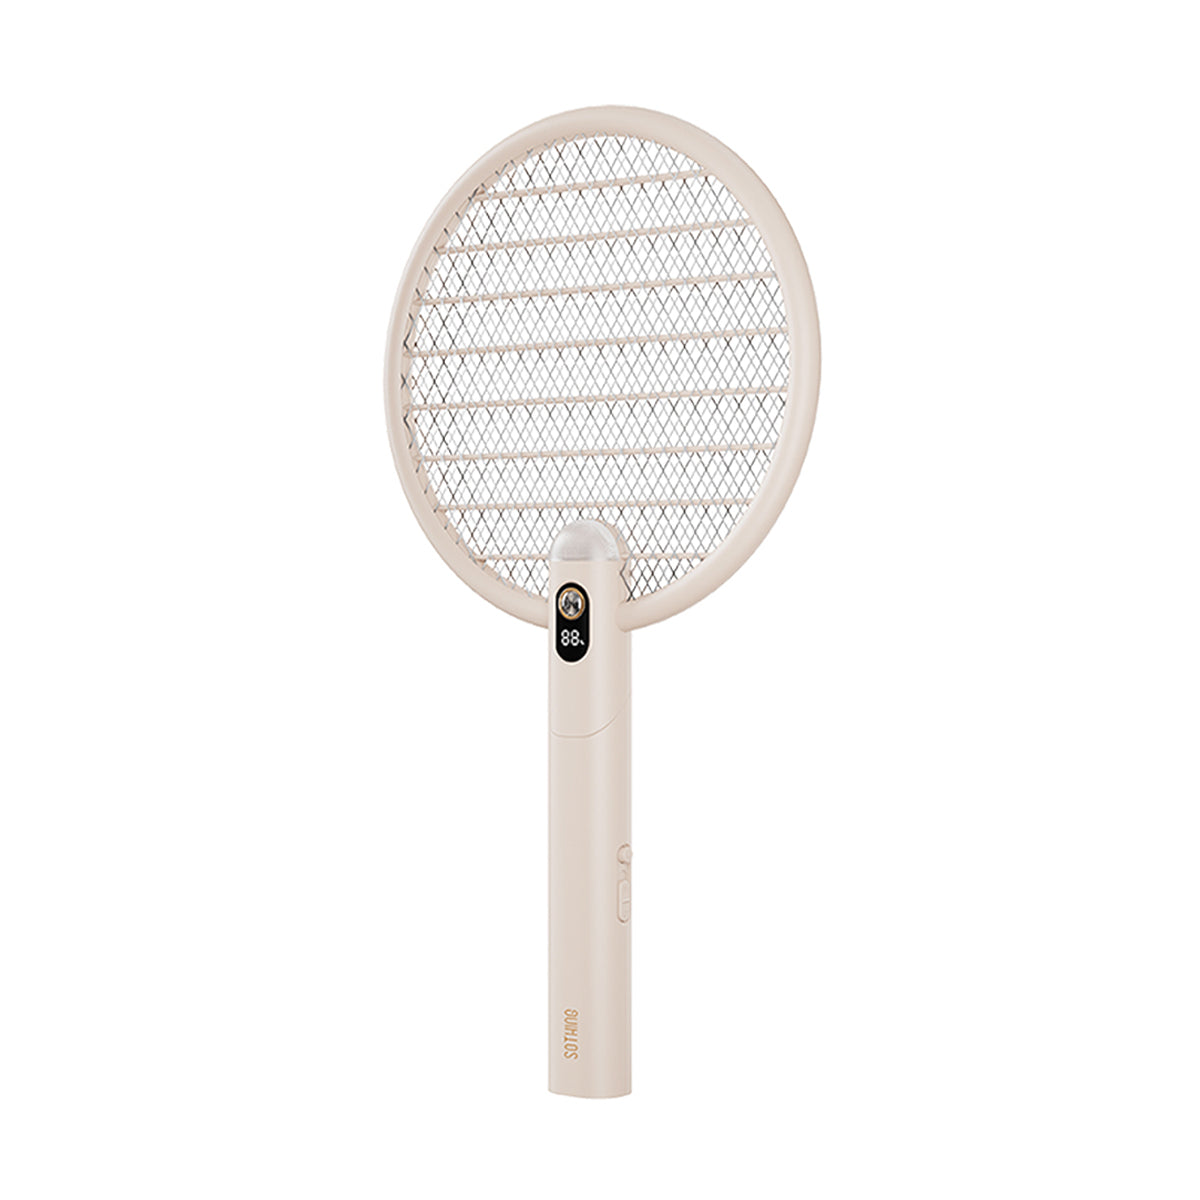 O2W SELECTION SOTHING NET Electric Mosquito Swatter-Smart Edition, White